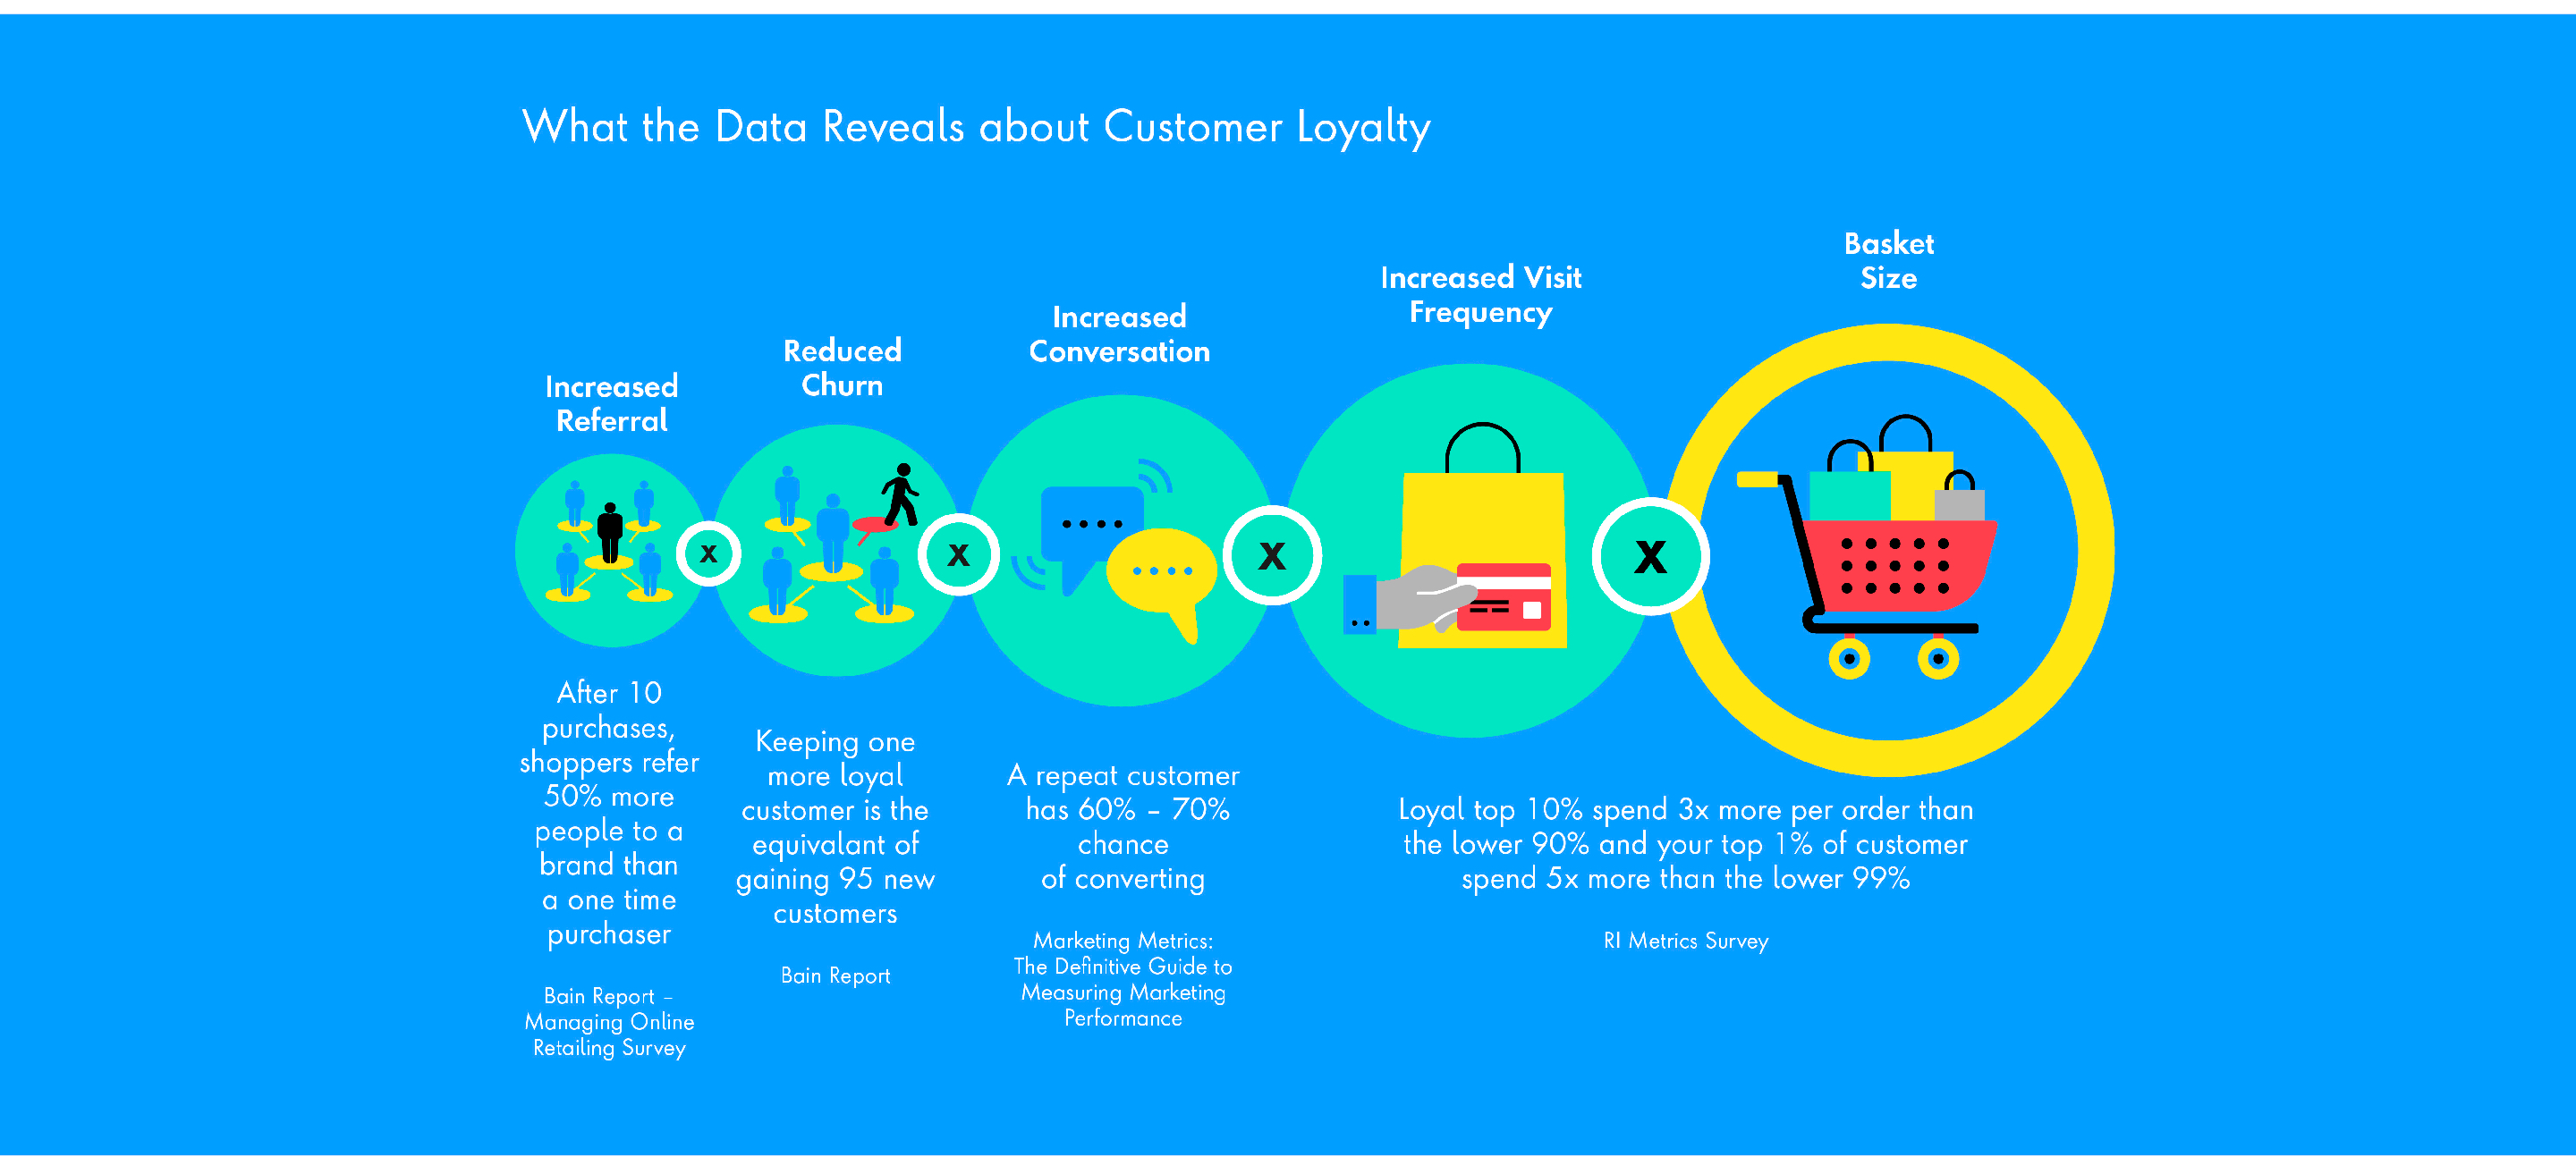 What the data reveals about customer loyalty: Increased Referral - After 10 purchases, shoppers refer 50% more people to a brand than a one-time purchaser; Reduced Churn: Keeping one more loyal customer is the equivilant of gaining 95 new customers; Increased Conversation: A repeat customer has 60% - 70% chance of converting; Increased visit frequency & Basket Size: Loyal top 10 spend 3X more per order than the lower 90% and your top 1% of customers spend 5X more than the lower 99%